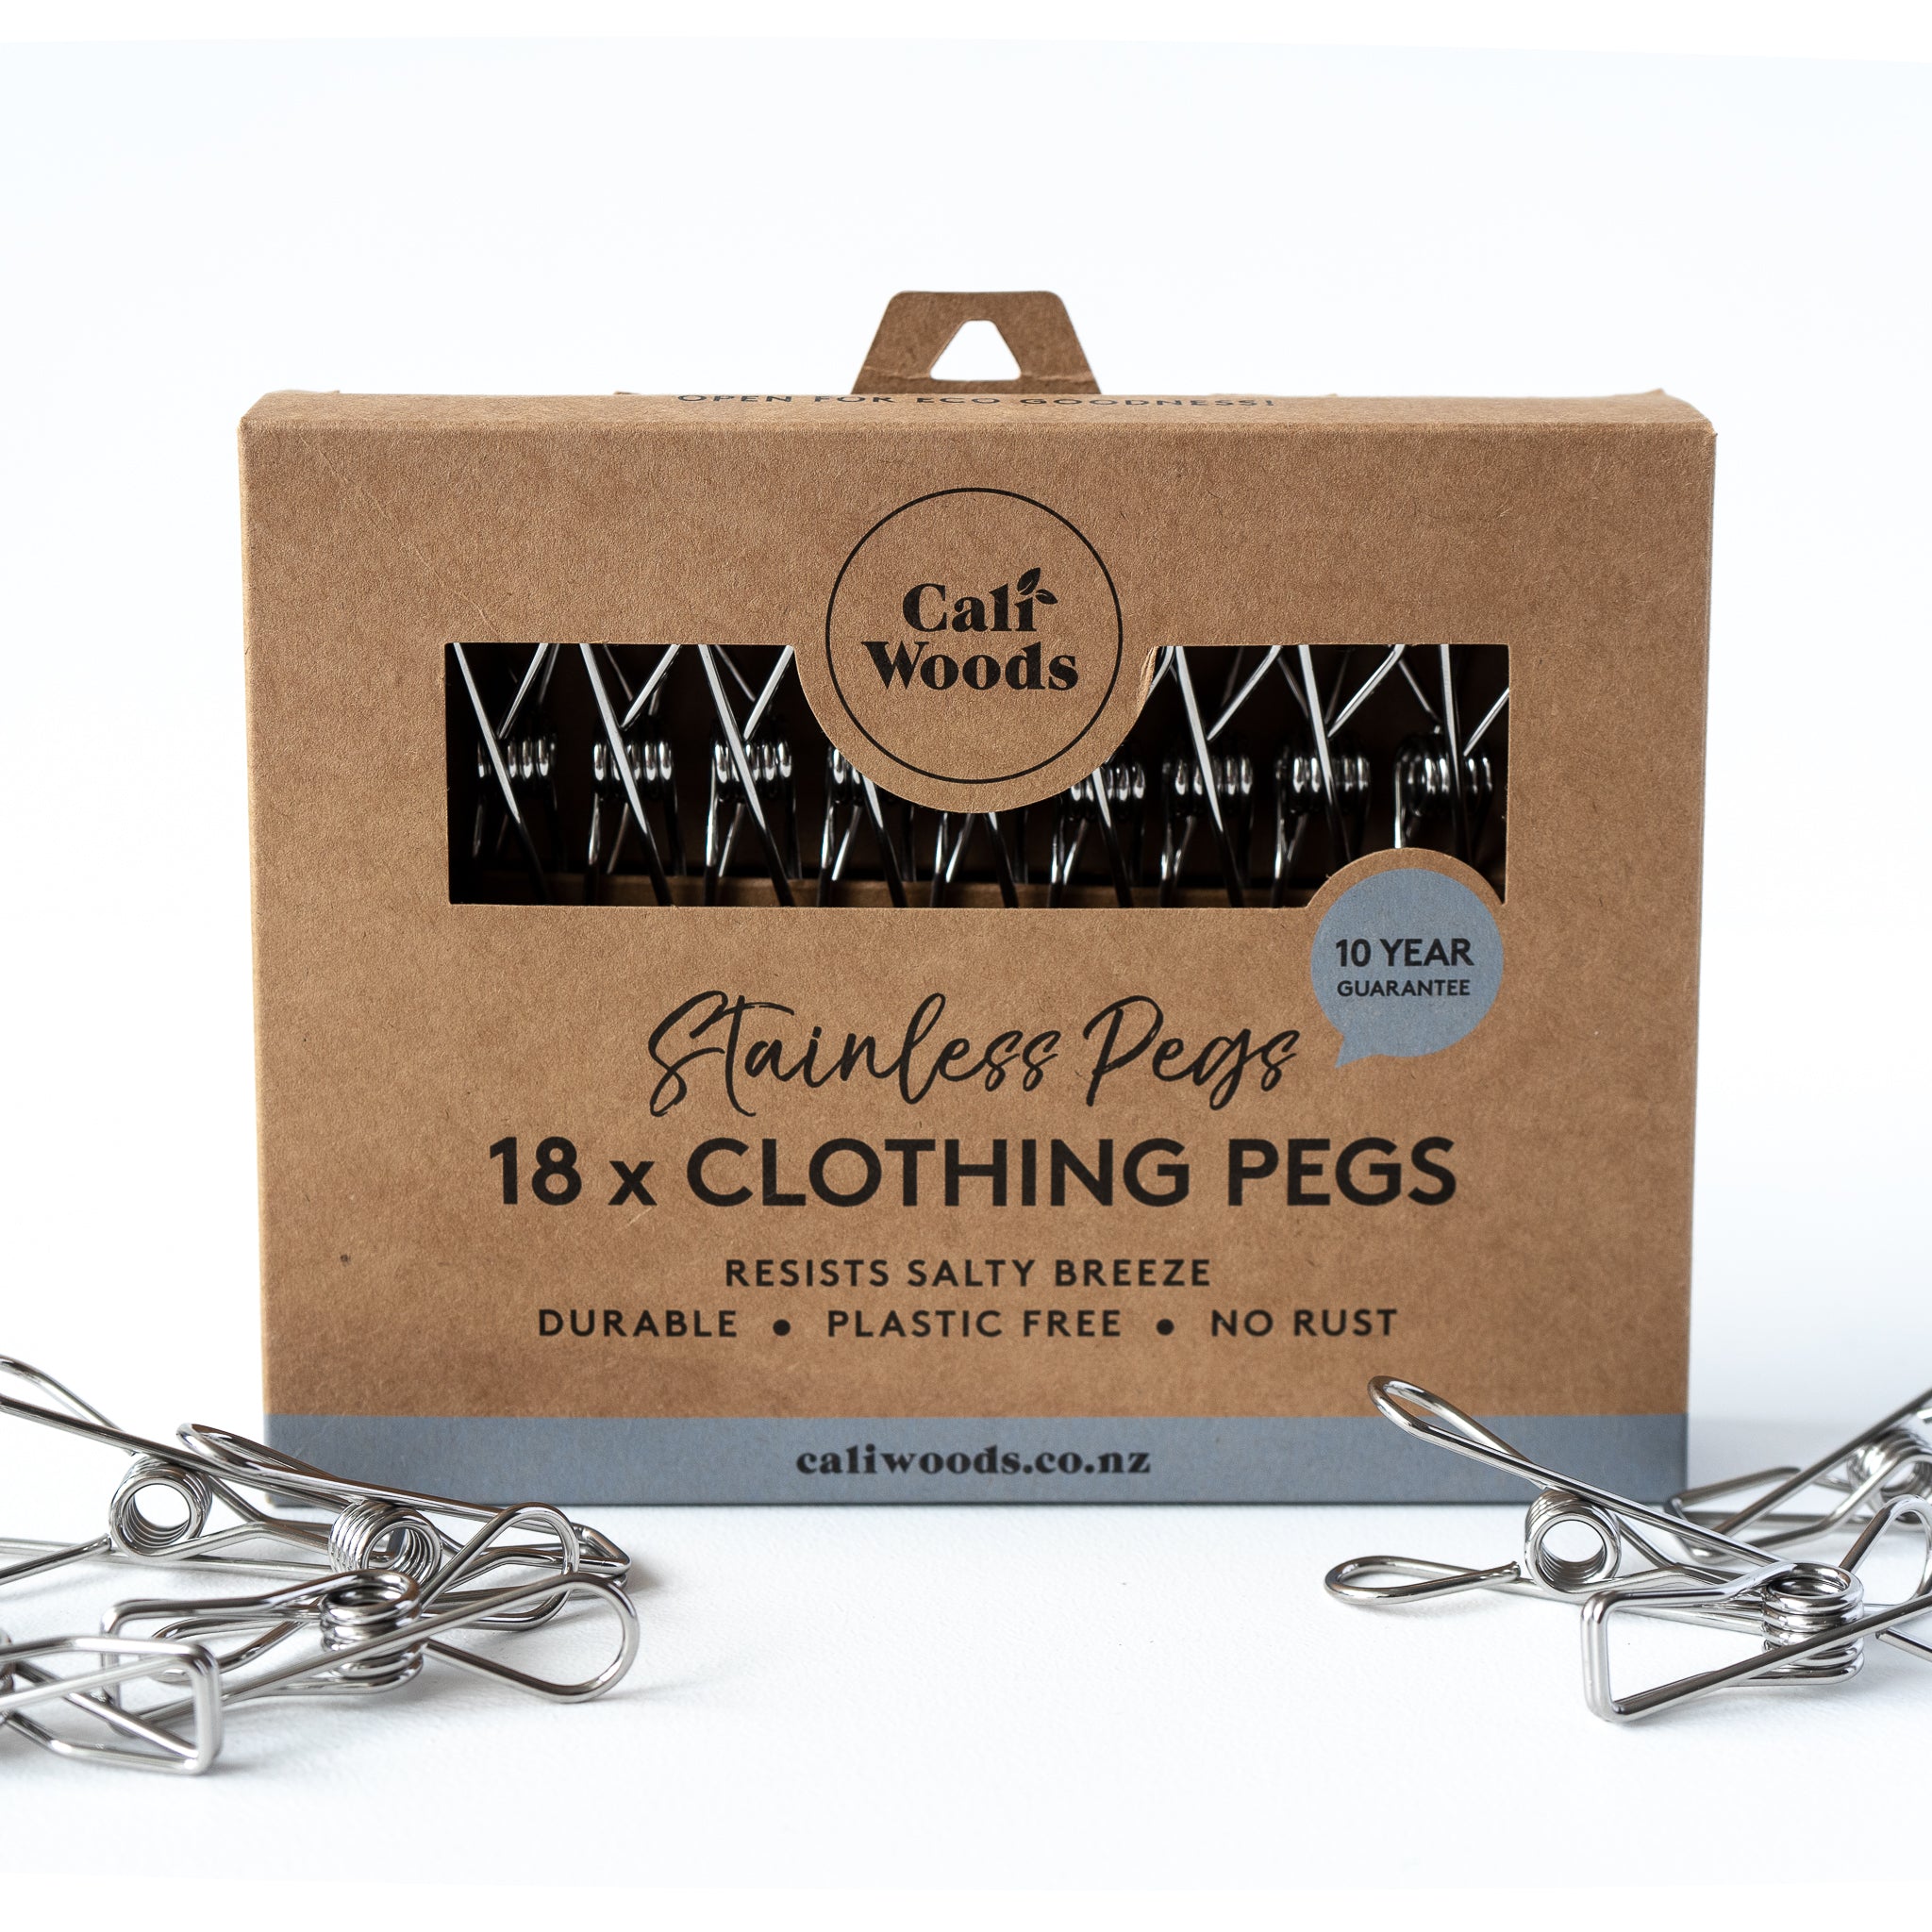 Caliwoods Stainless Steel Metal Clothing Pegs plastic free NZ The Eco Society